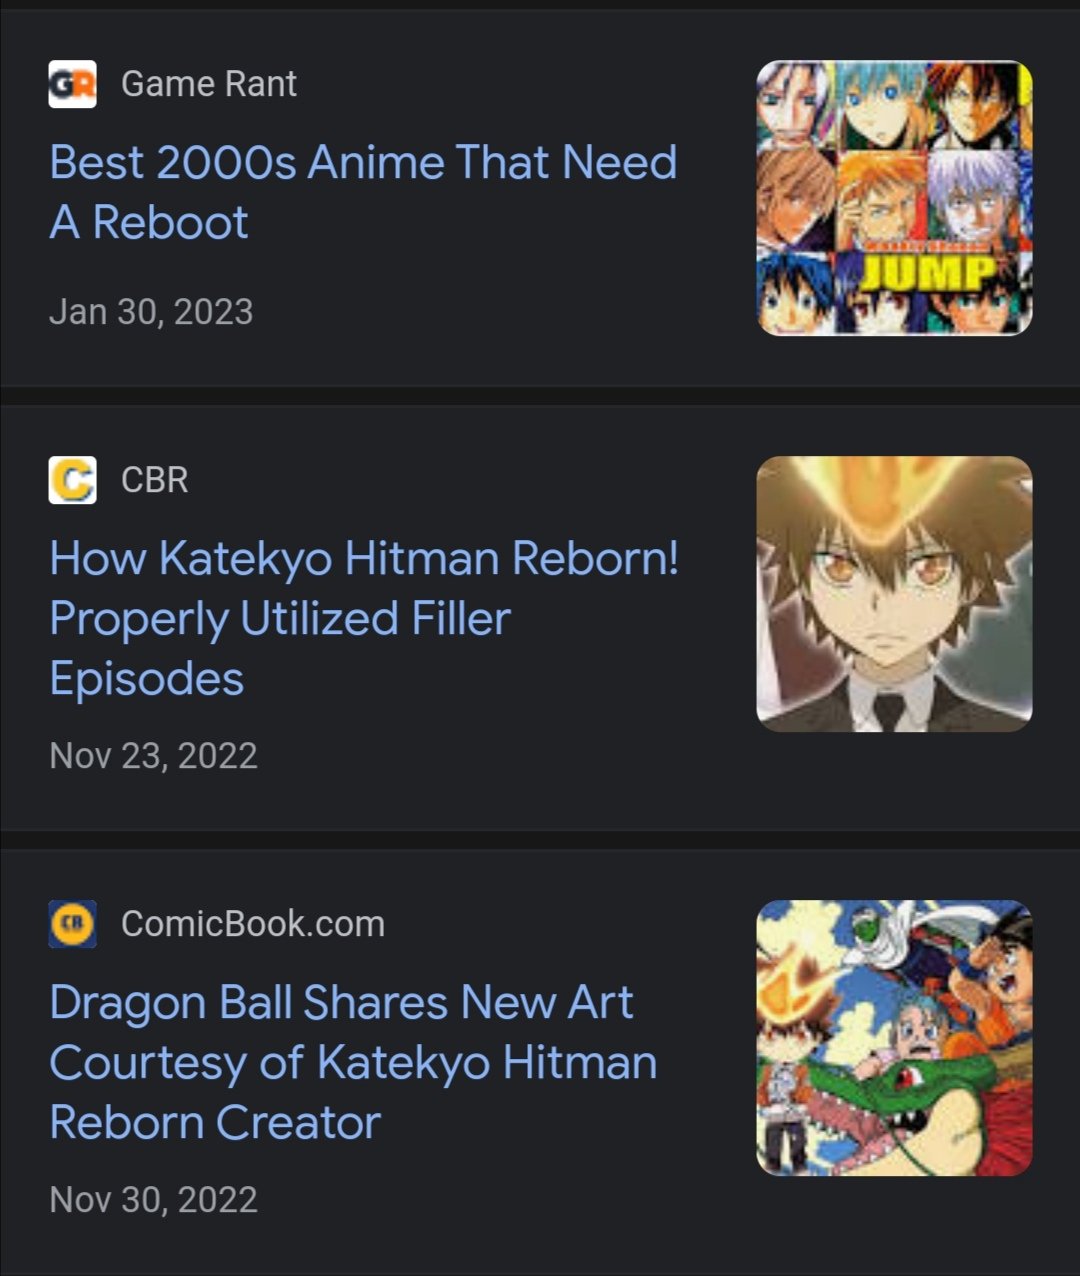 Best 2000s Anime That Need A Reboot